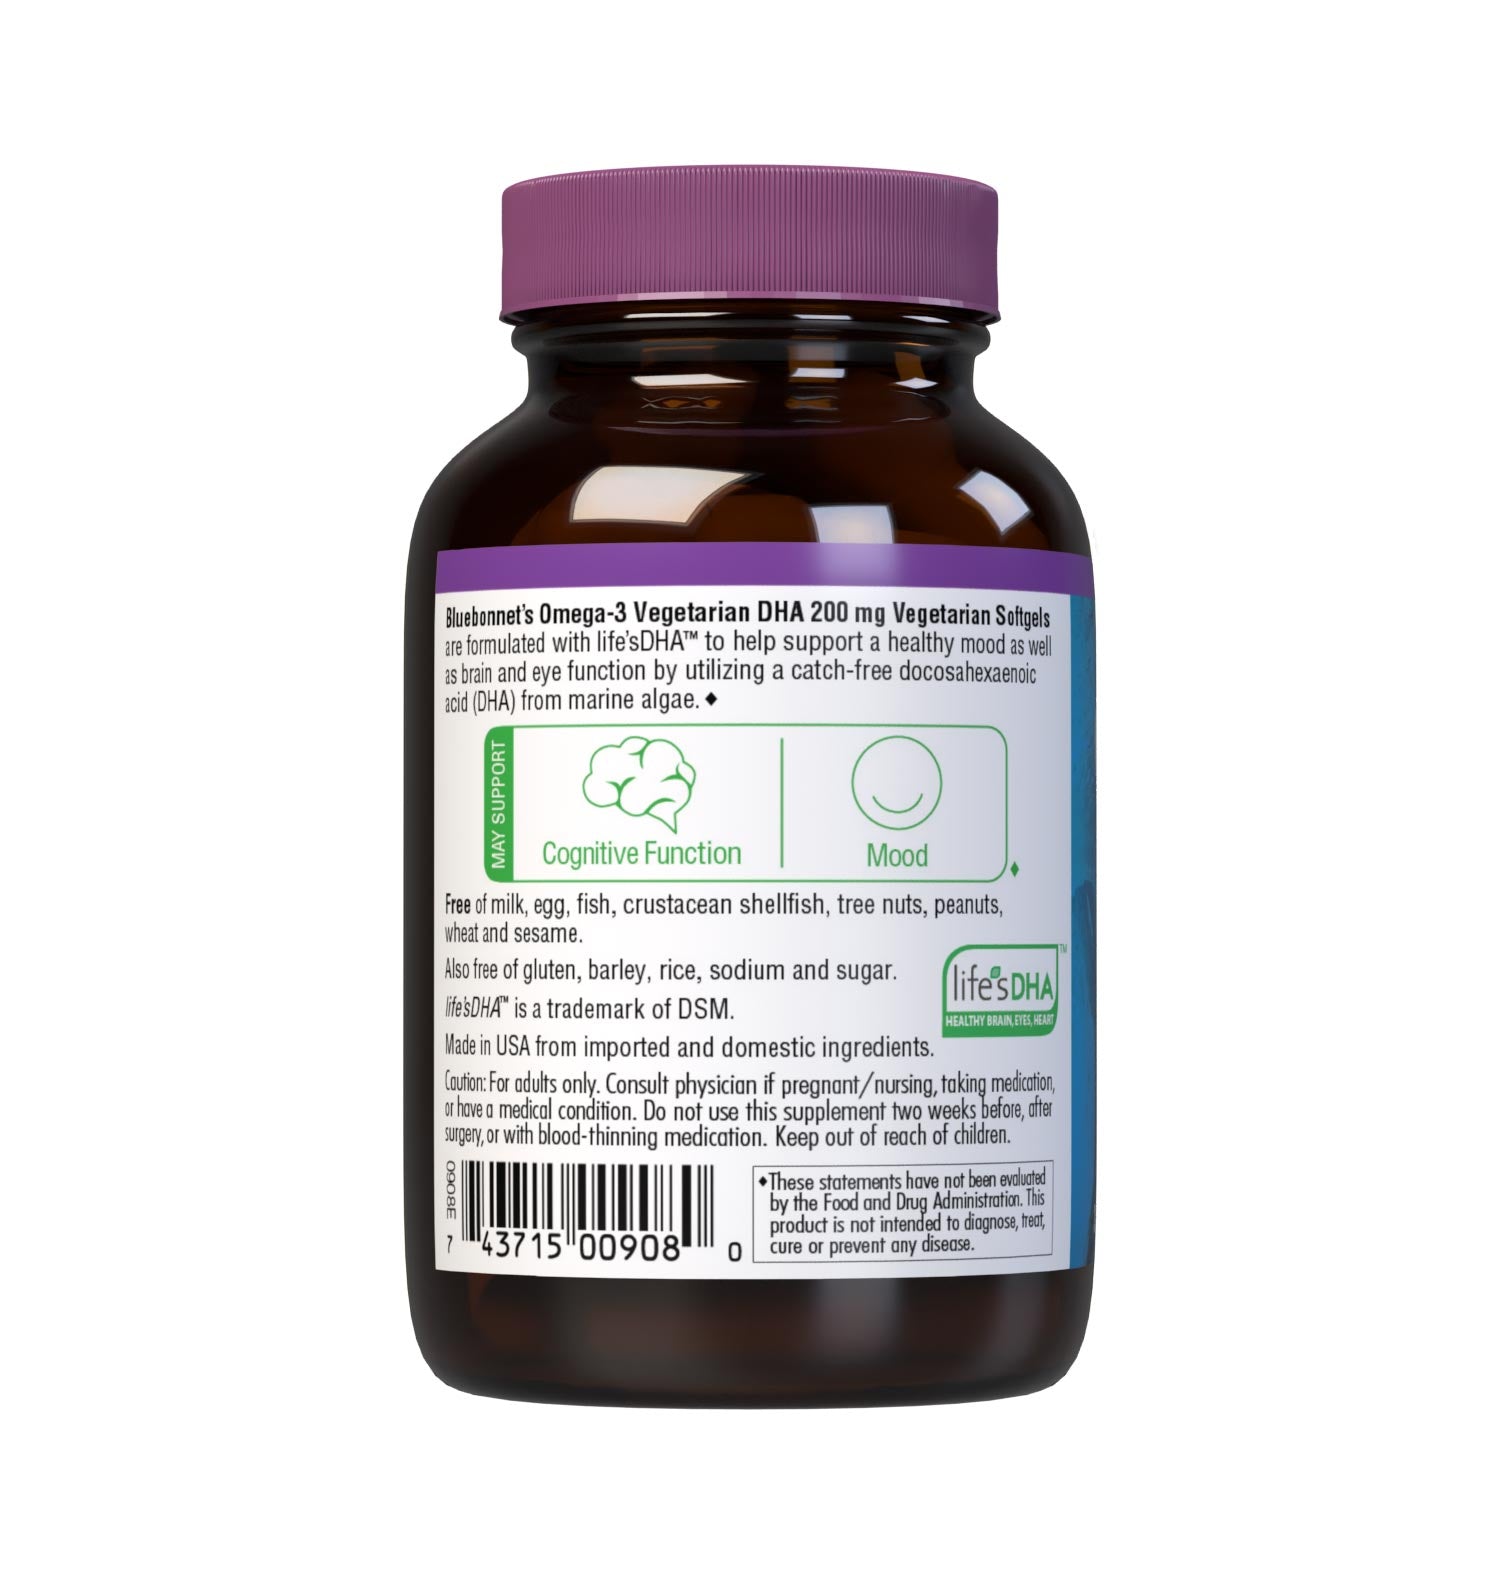 Bluebonnet’s Omega-3 Vegetarian DHA 200 mg 30 Vegetarian Softgels are formulated with life’sDHA, to help support a healthy mood as well as brain and eye function by utilzing a catch-free docosahexaenoic acid (DHA) from marine algae. Description panel. #size_30 count